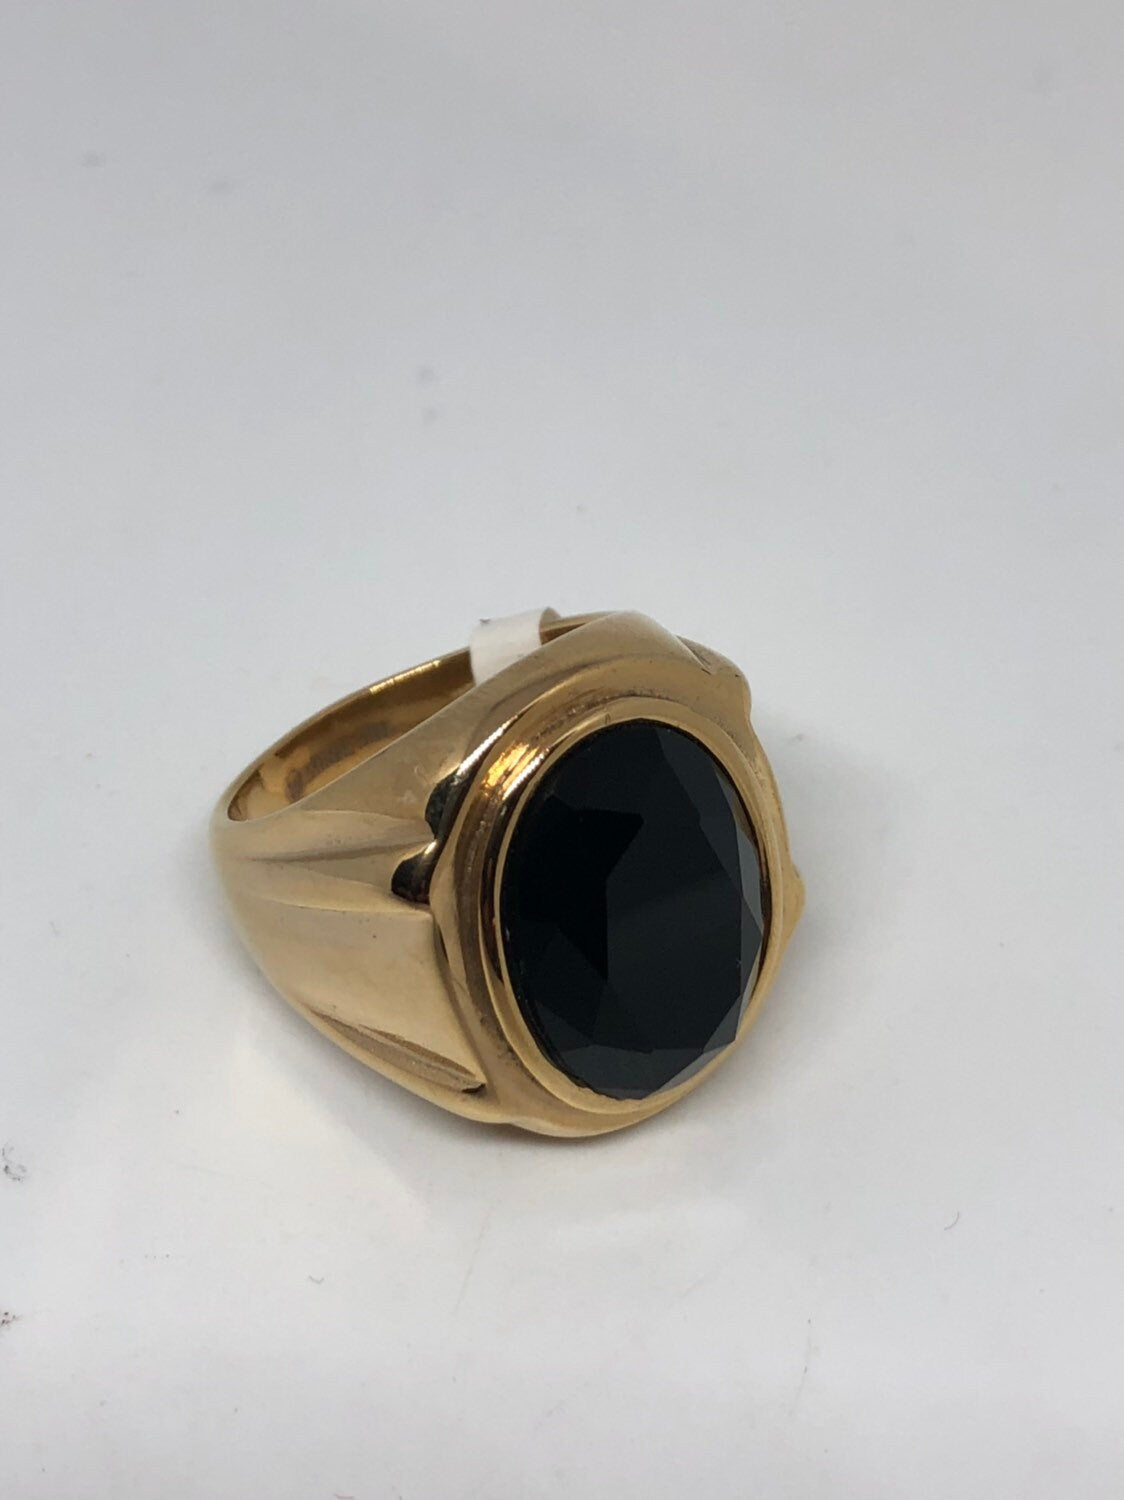 Vintage Gothic Gold Finished Stainless Steel Black Onyx Genuine Mens Ring